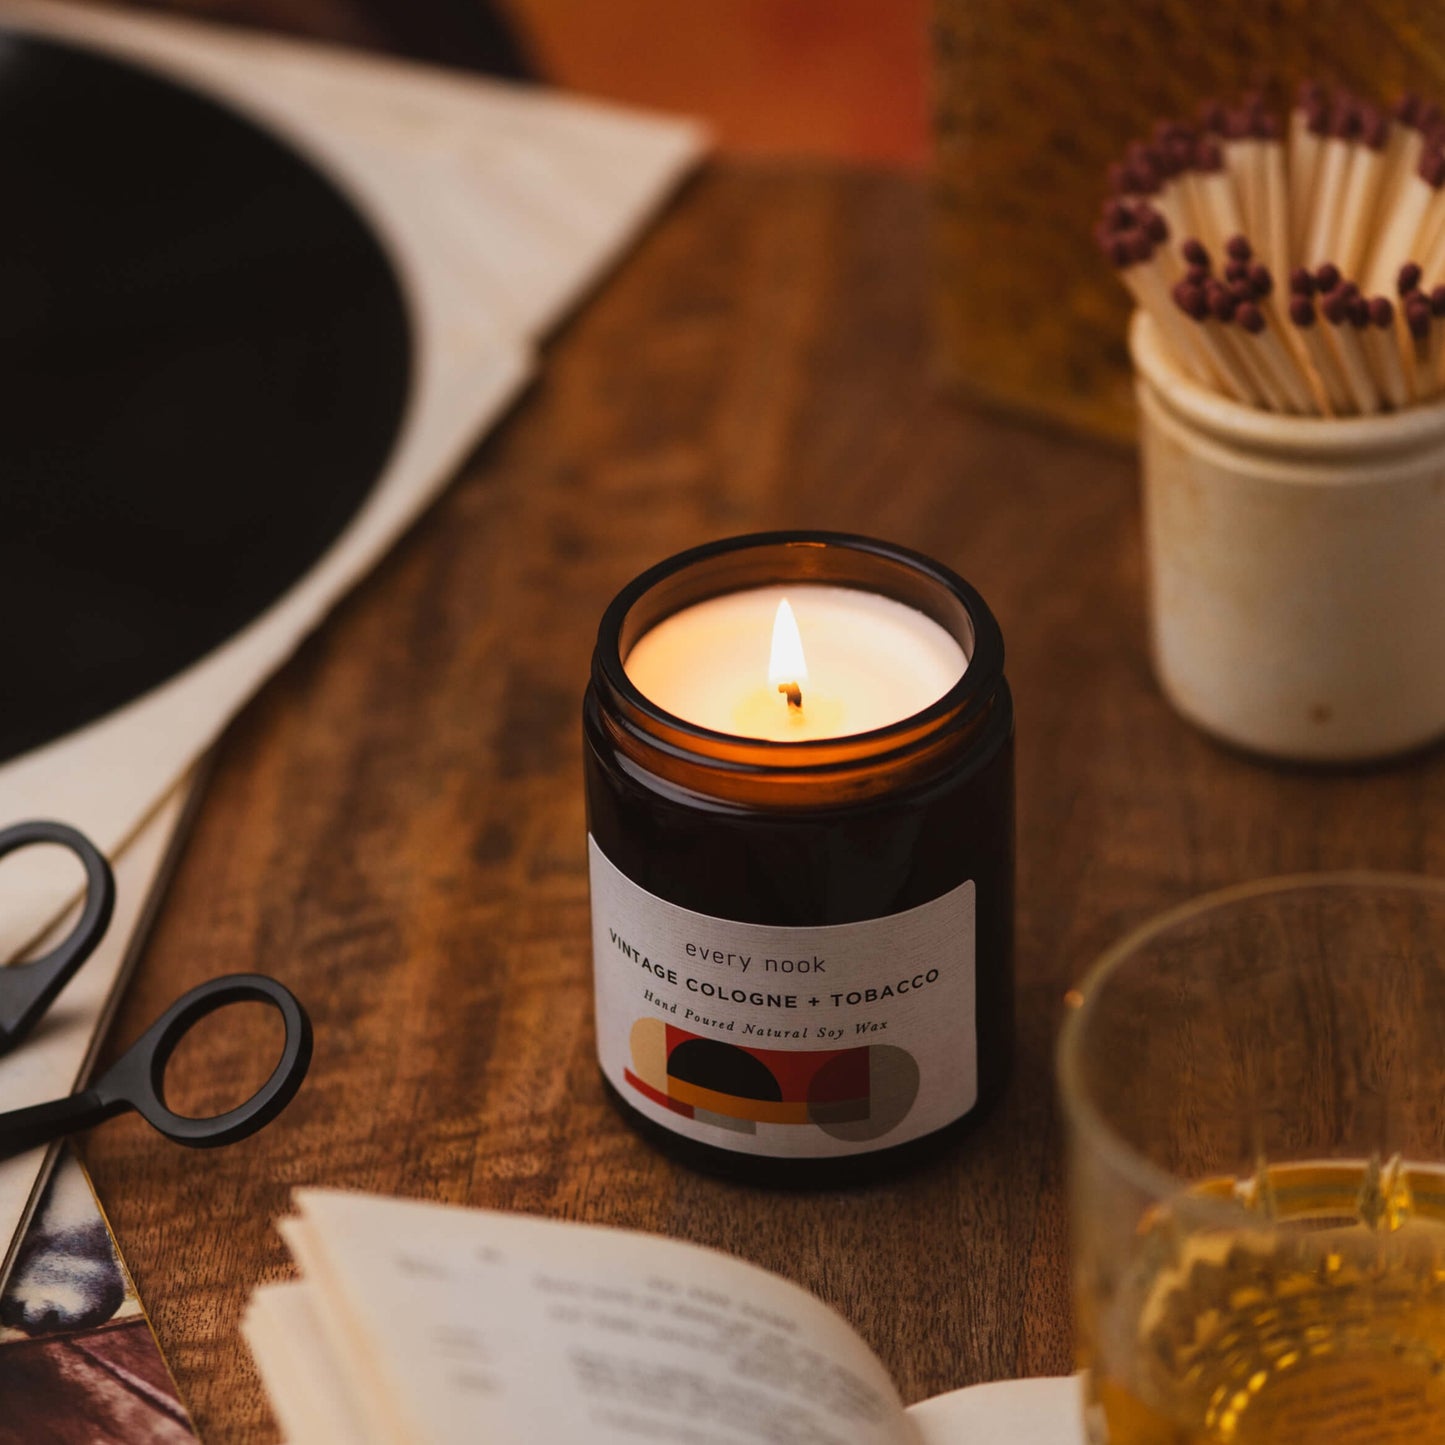 Vintage Cologne + Tobacco scented candle